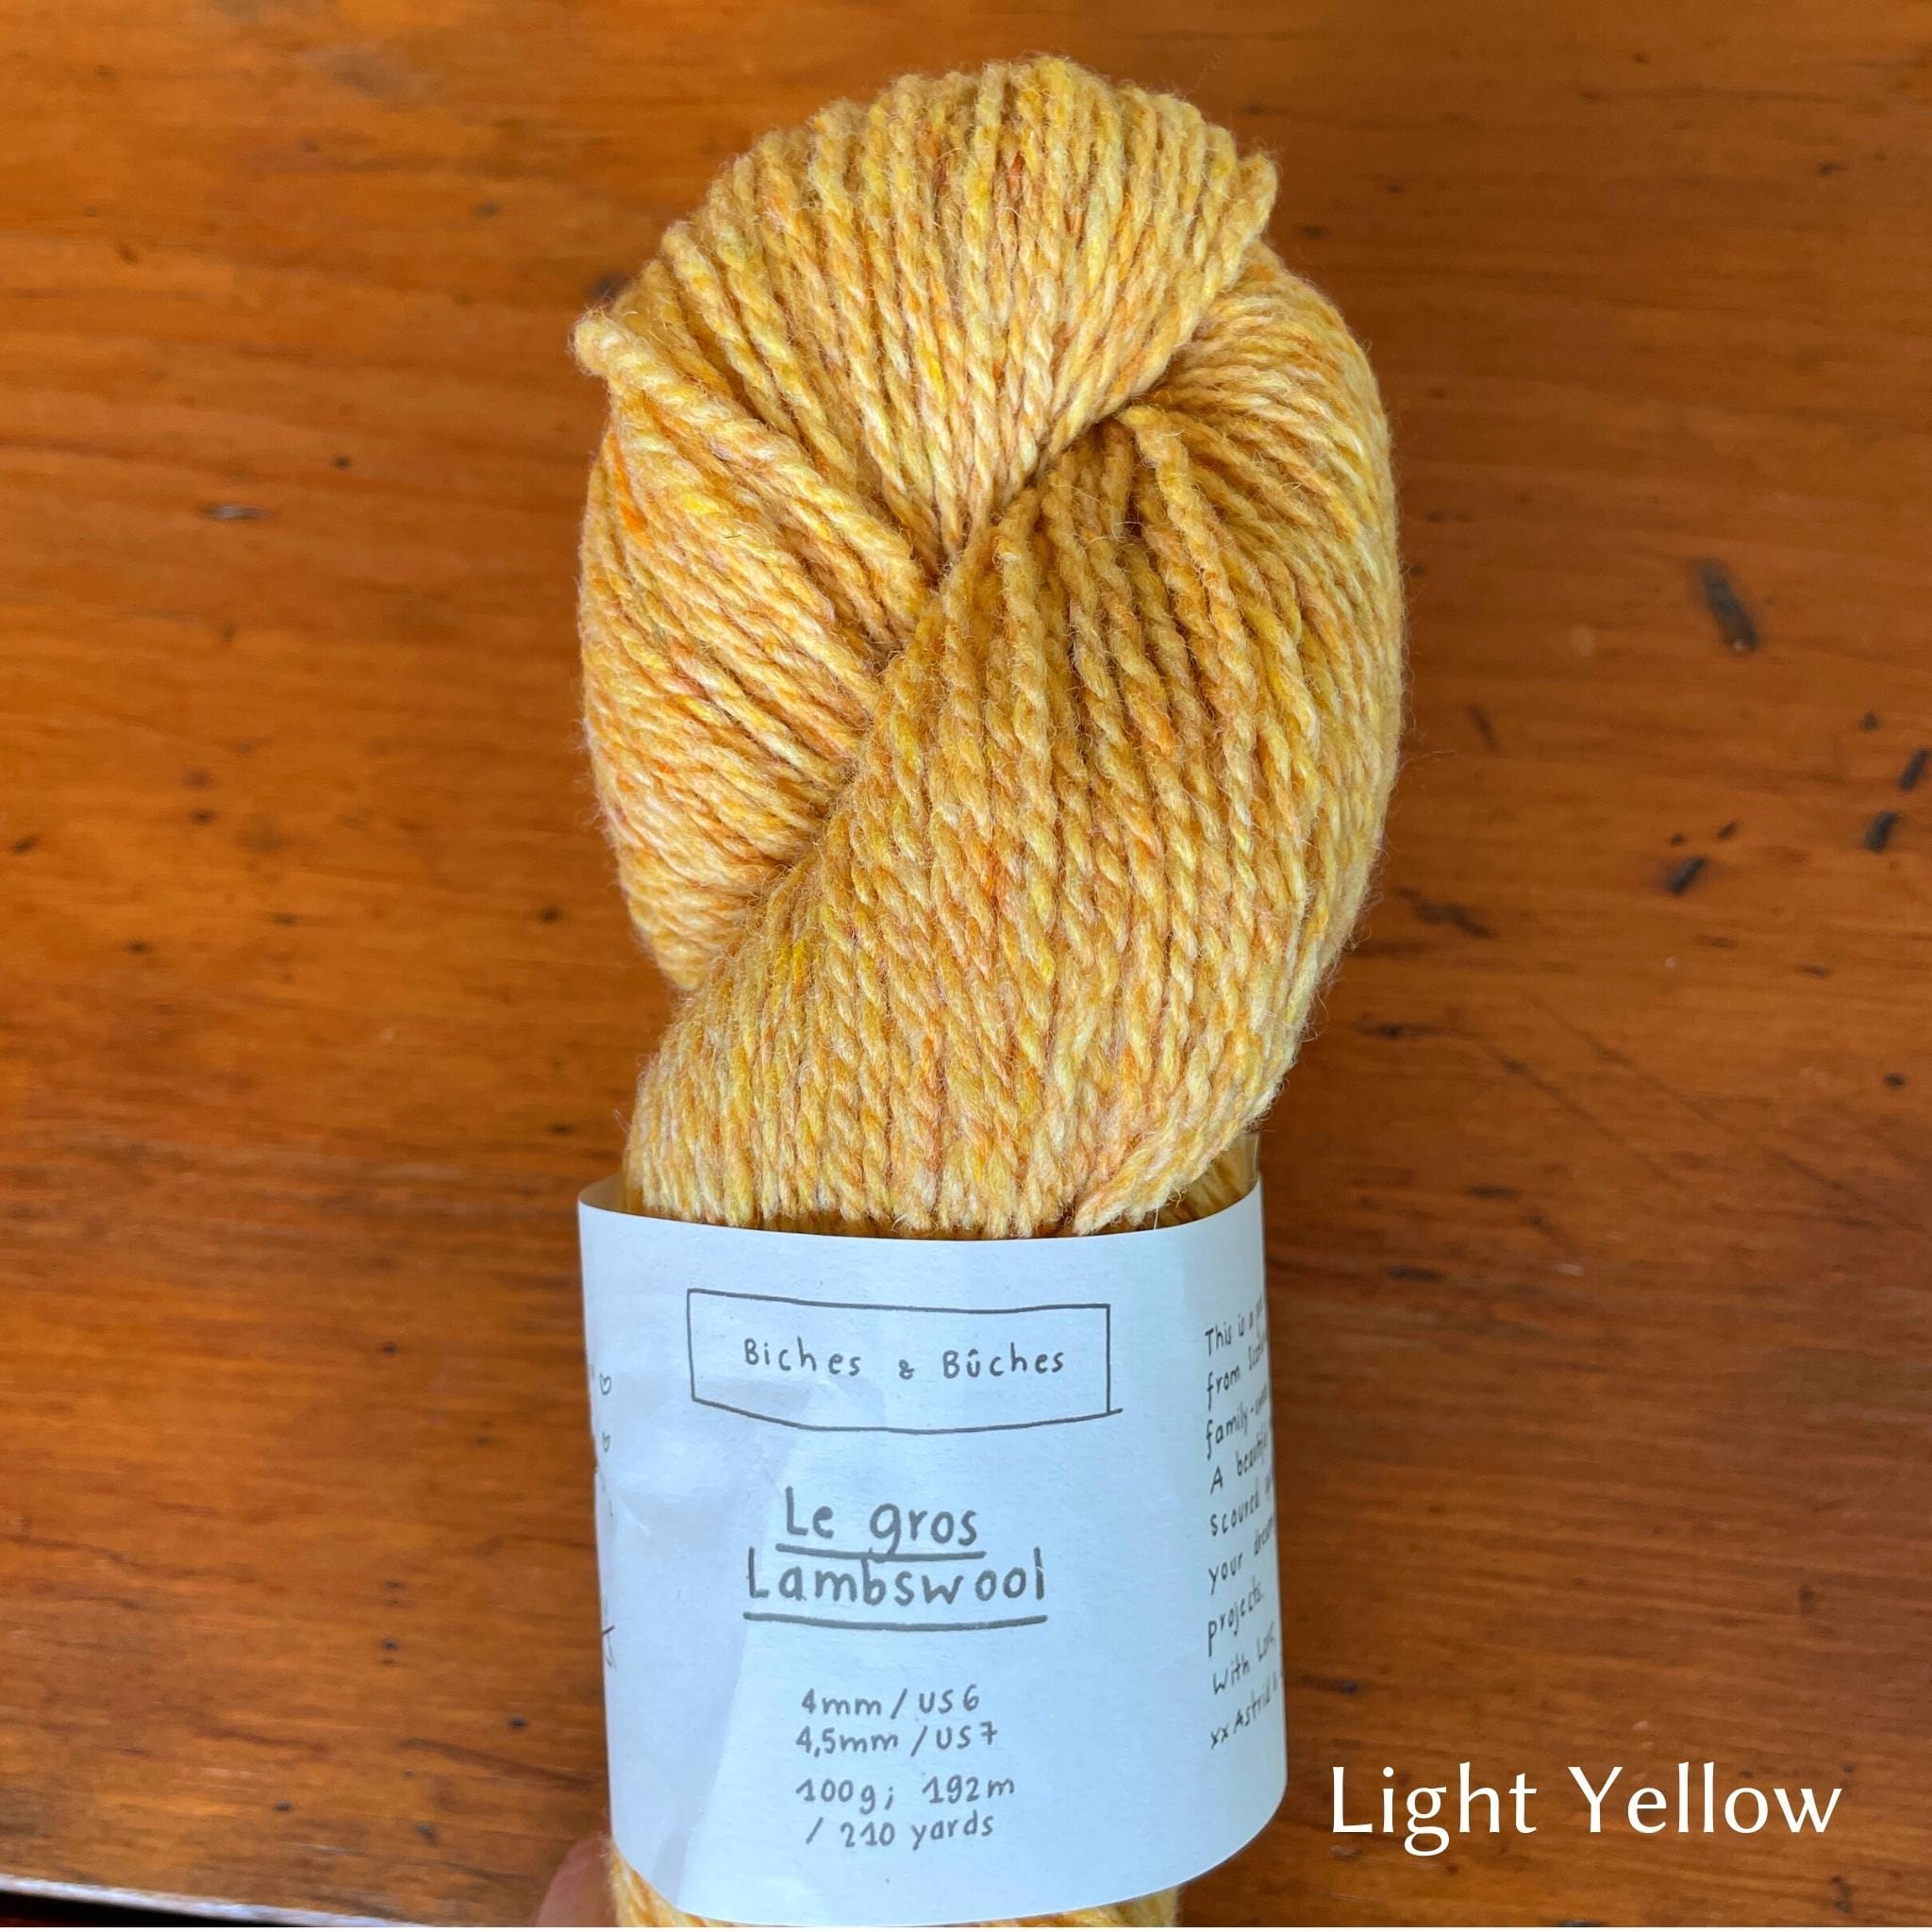 Skein of  Biches & Buches Les Gros Yarn in yellow with hints of orange.